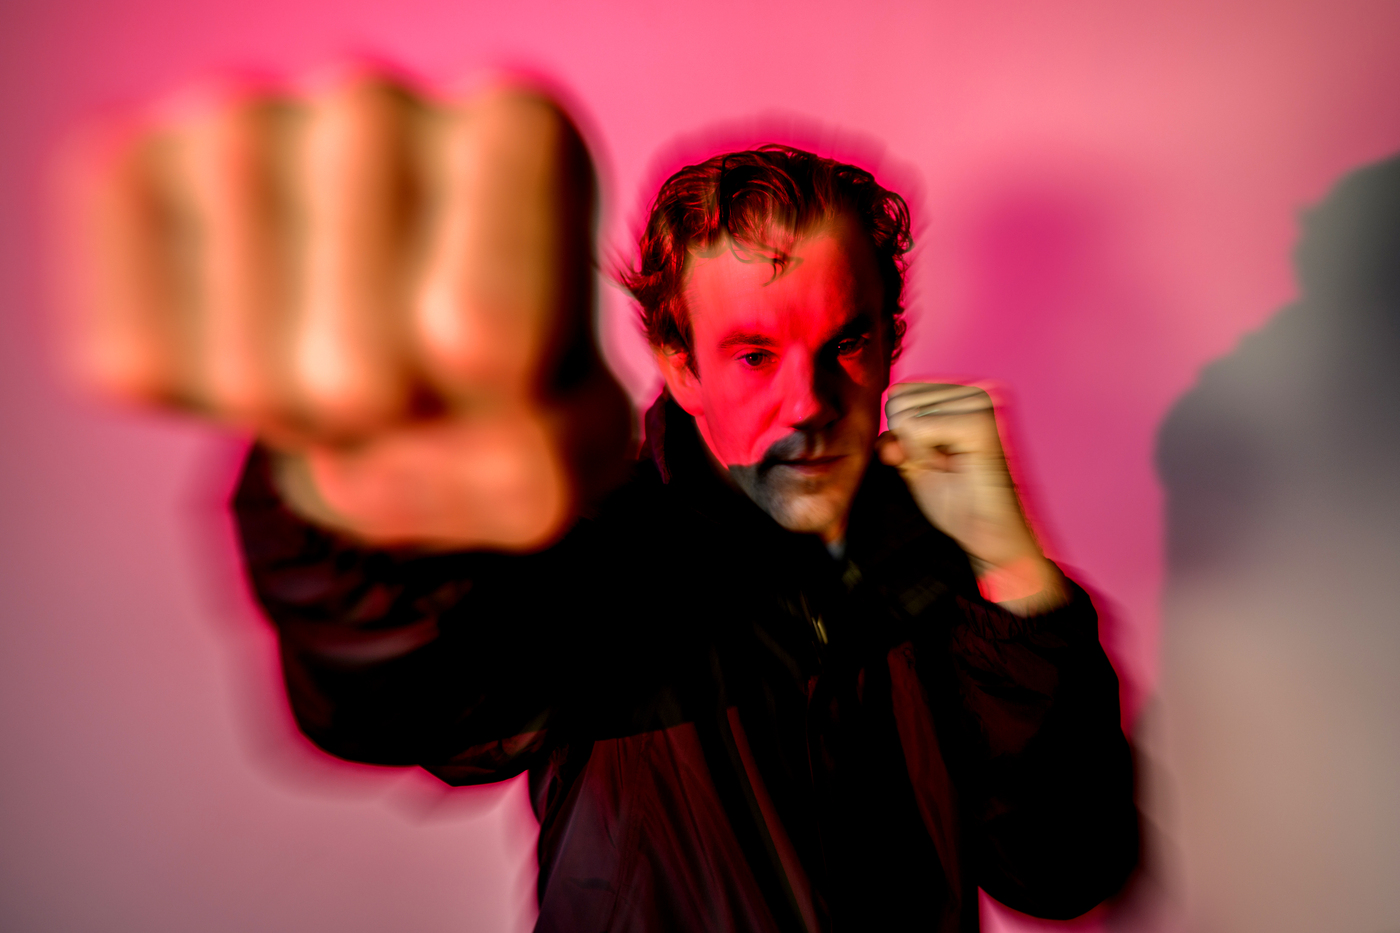 A person throwing a punch in front of a pink background, captured in a blurry image.